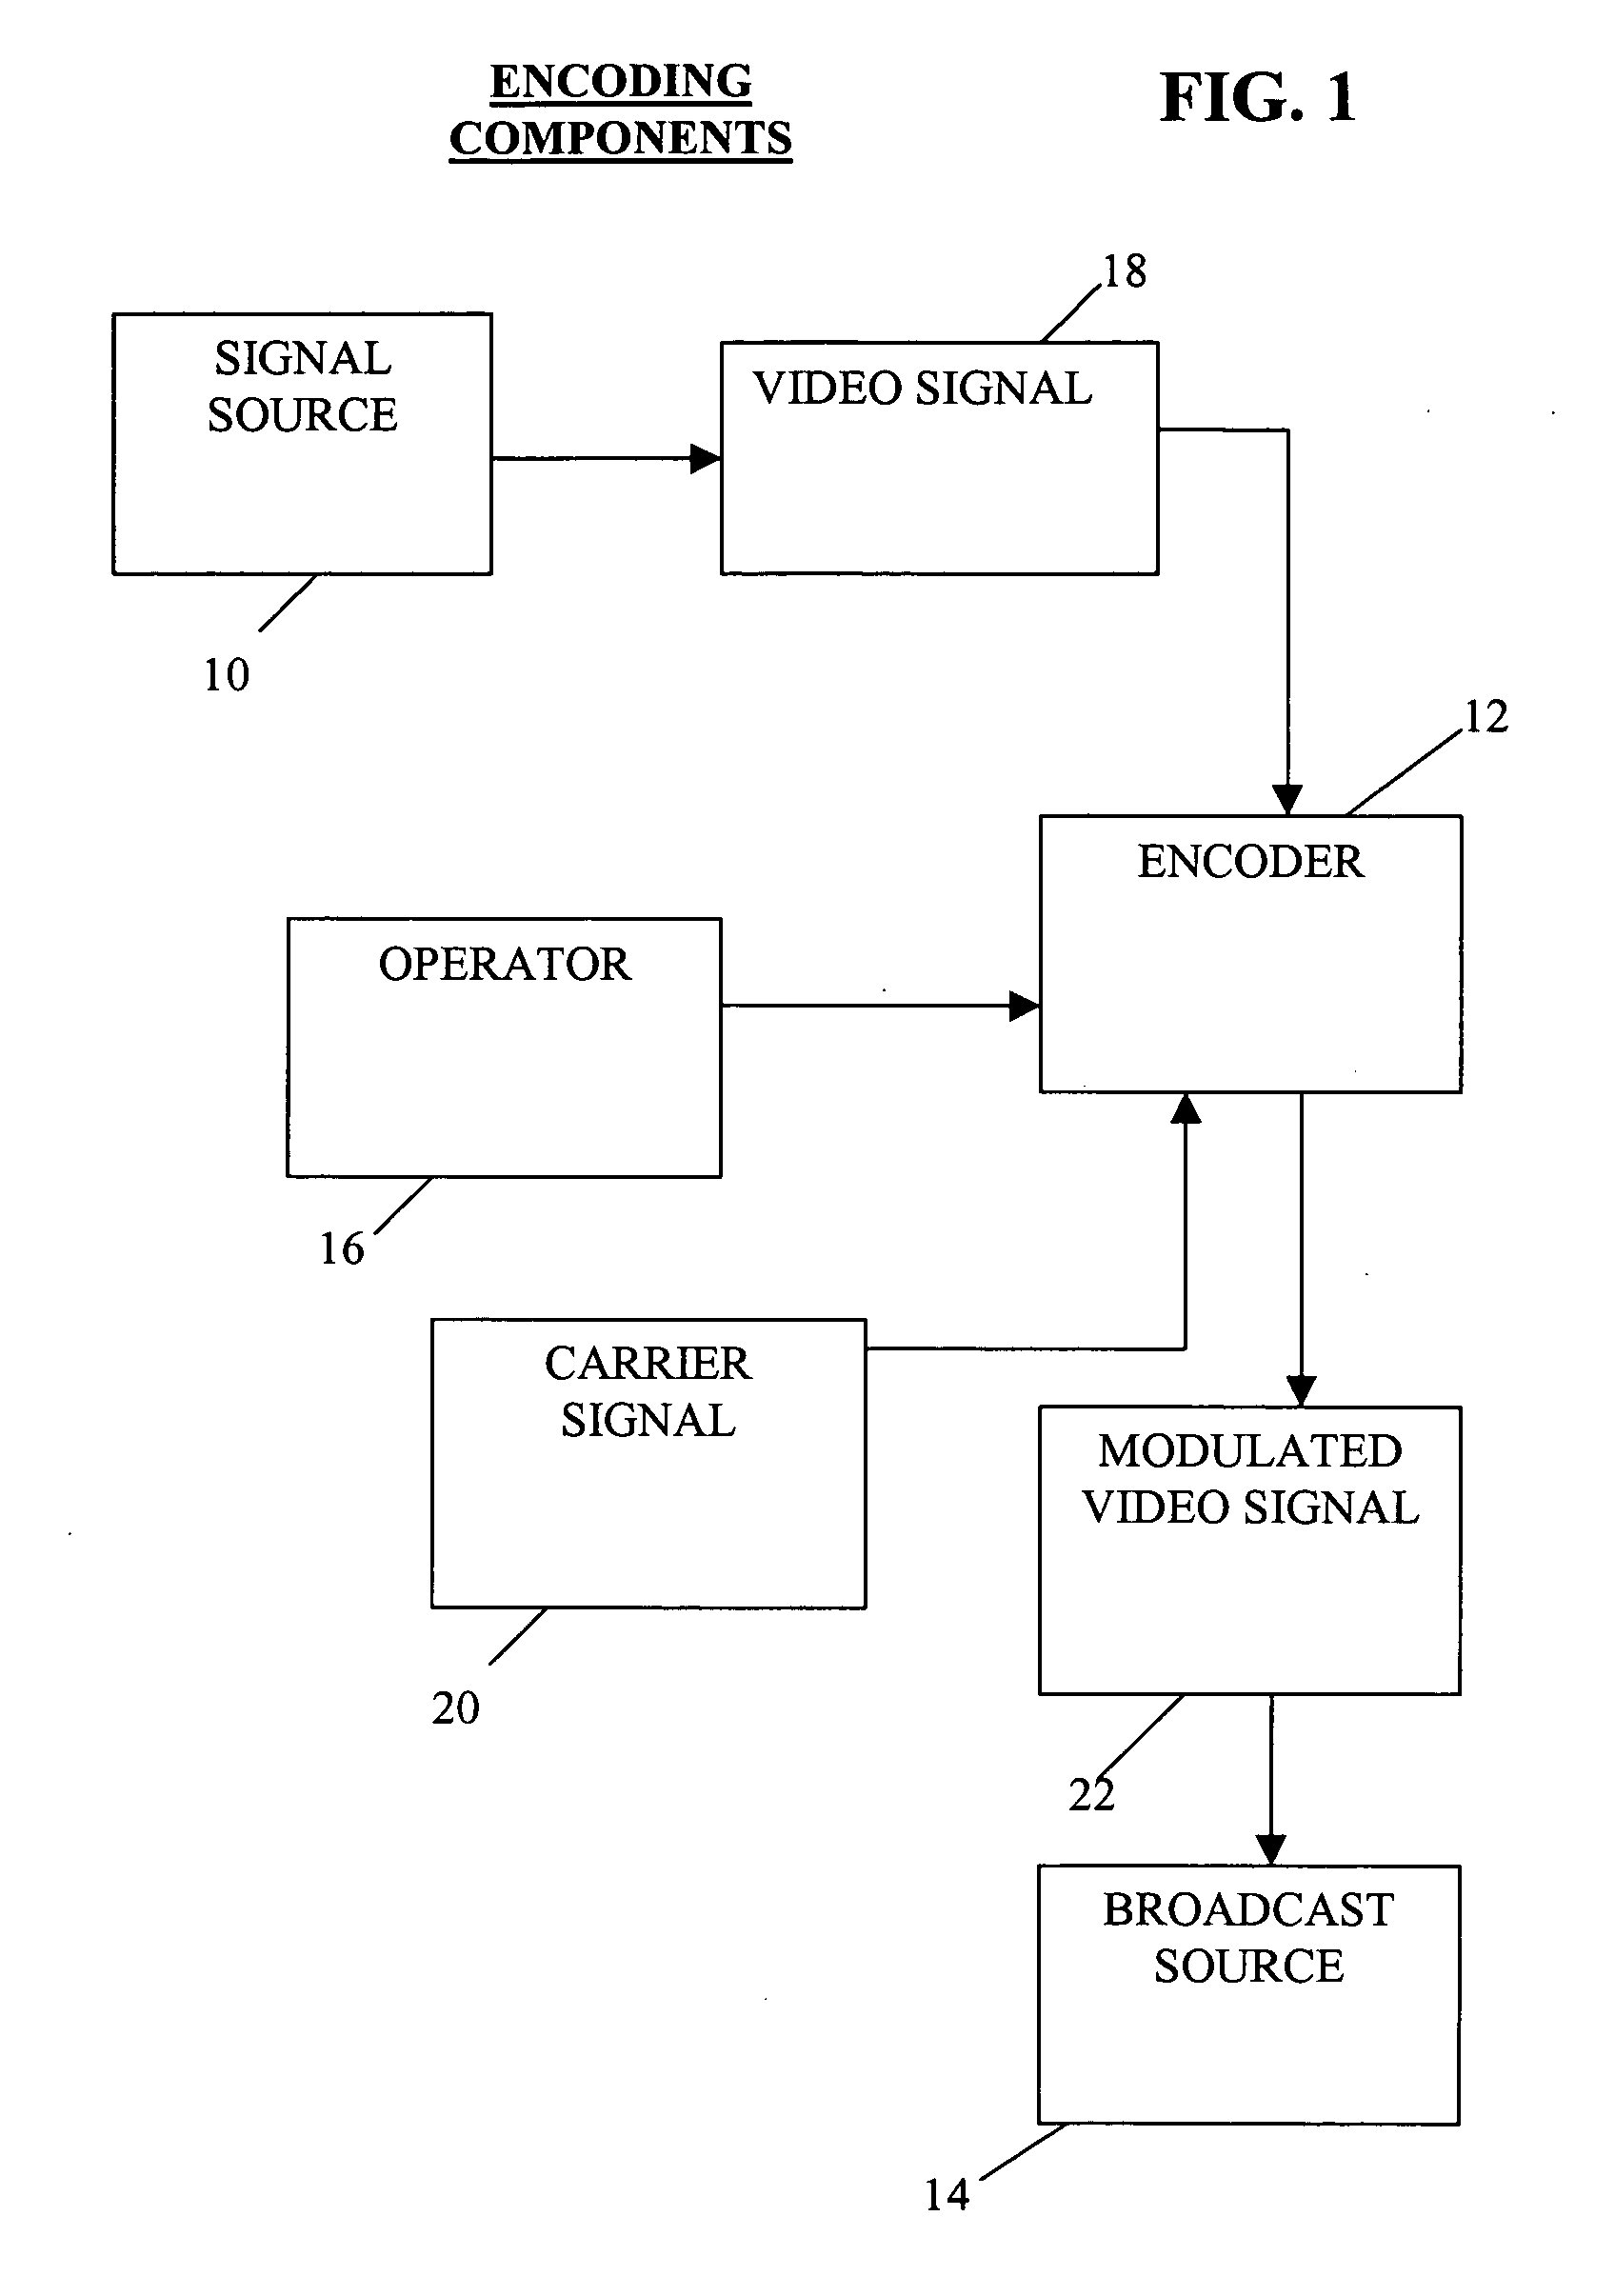 Method and system for enhanced modulation of video signals